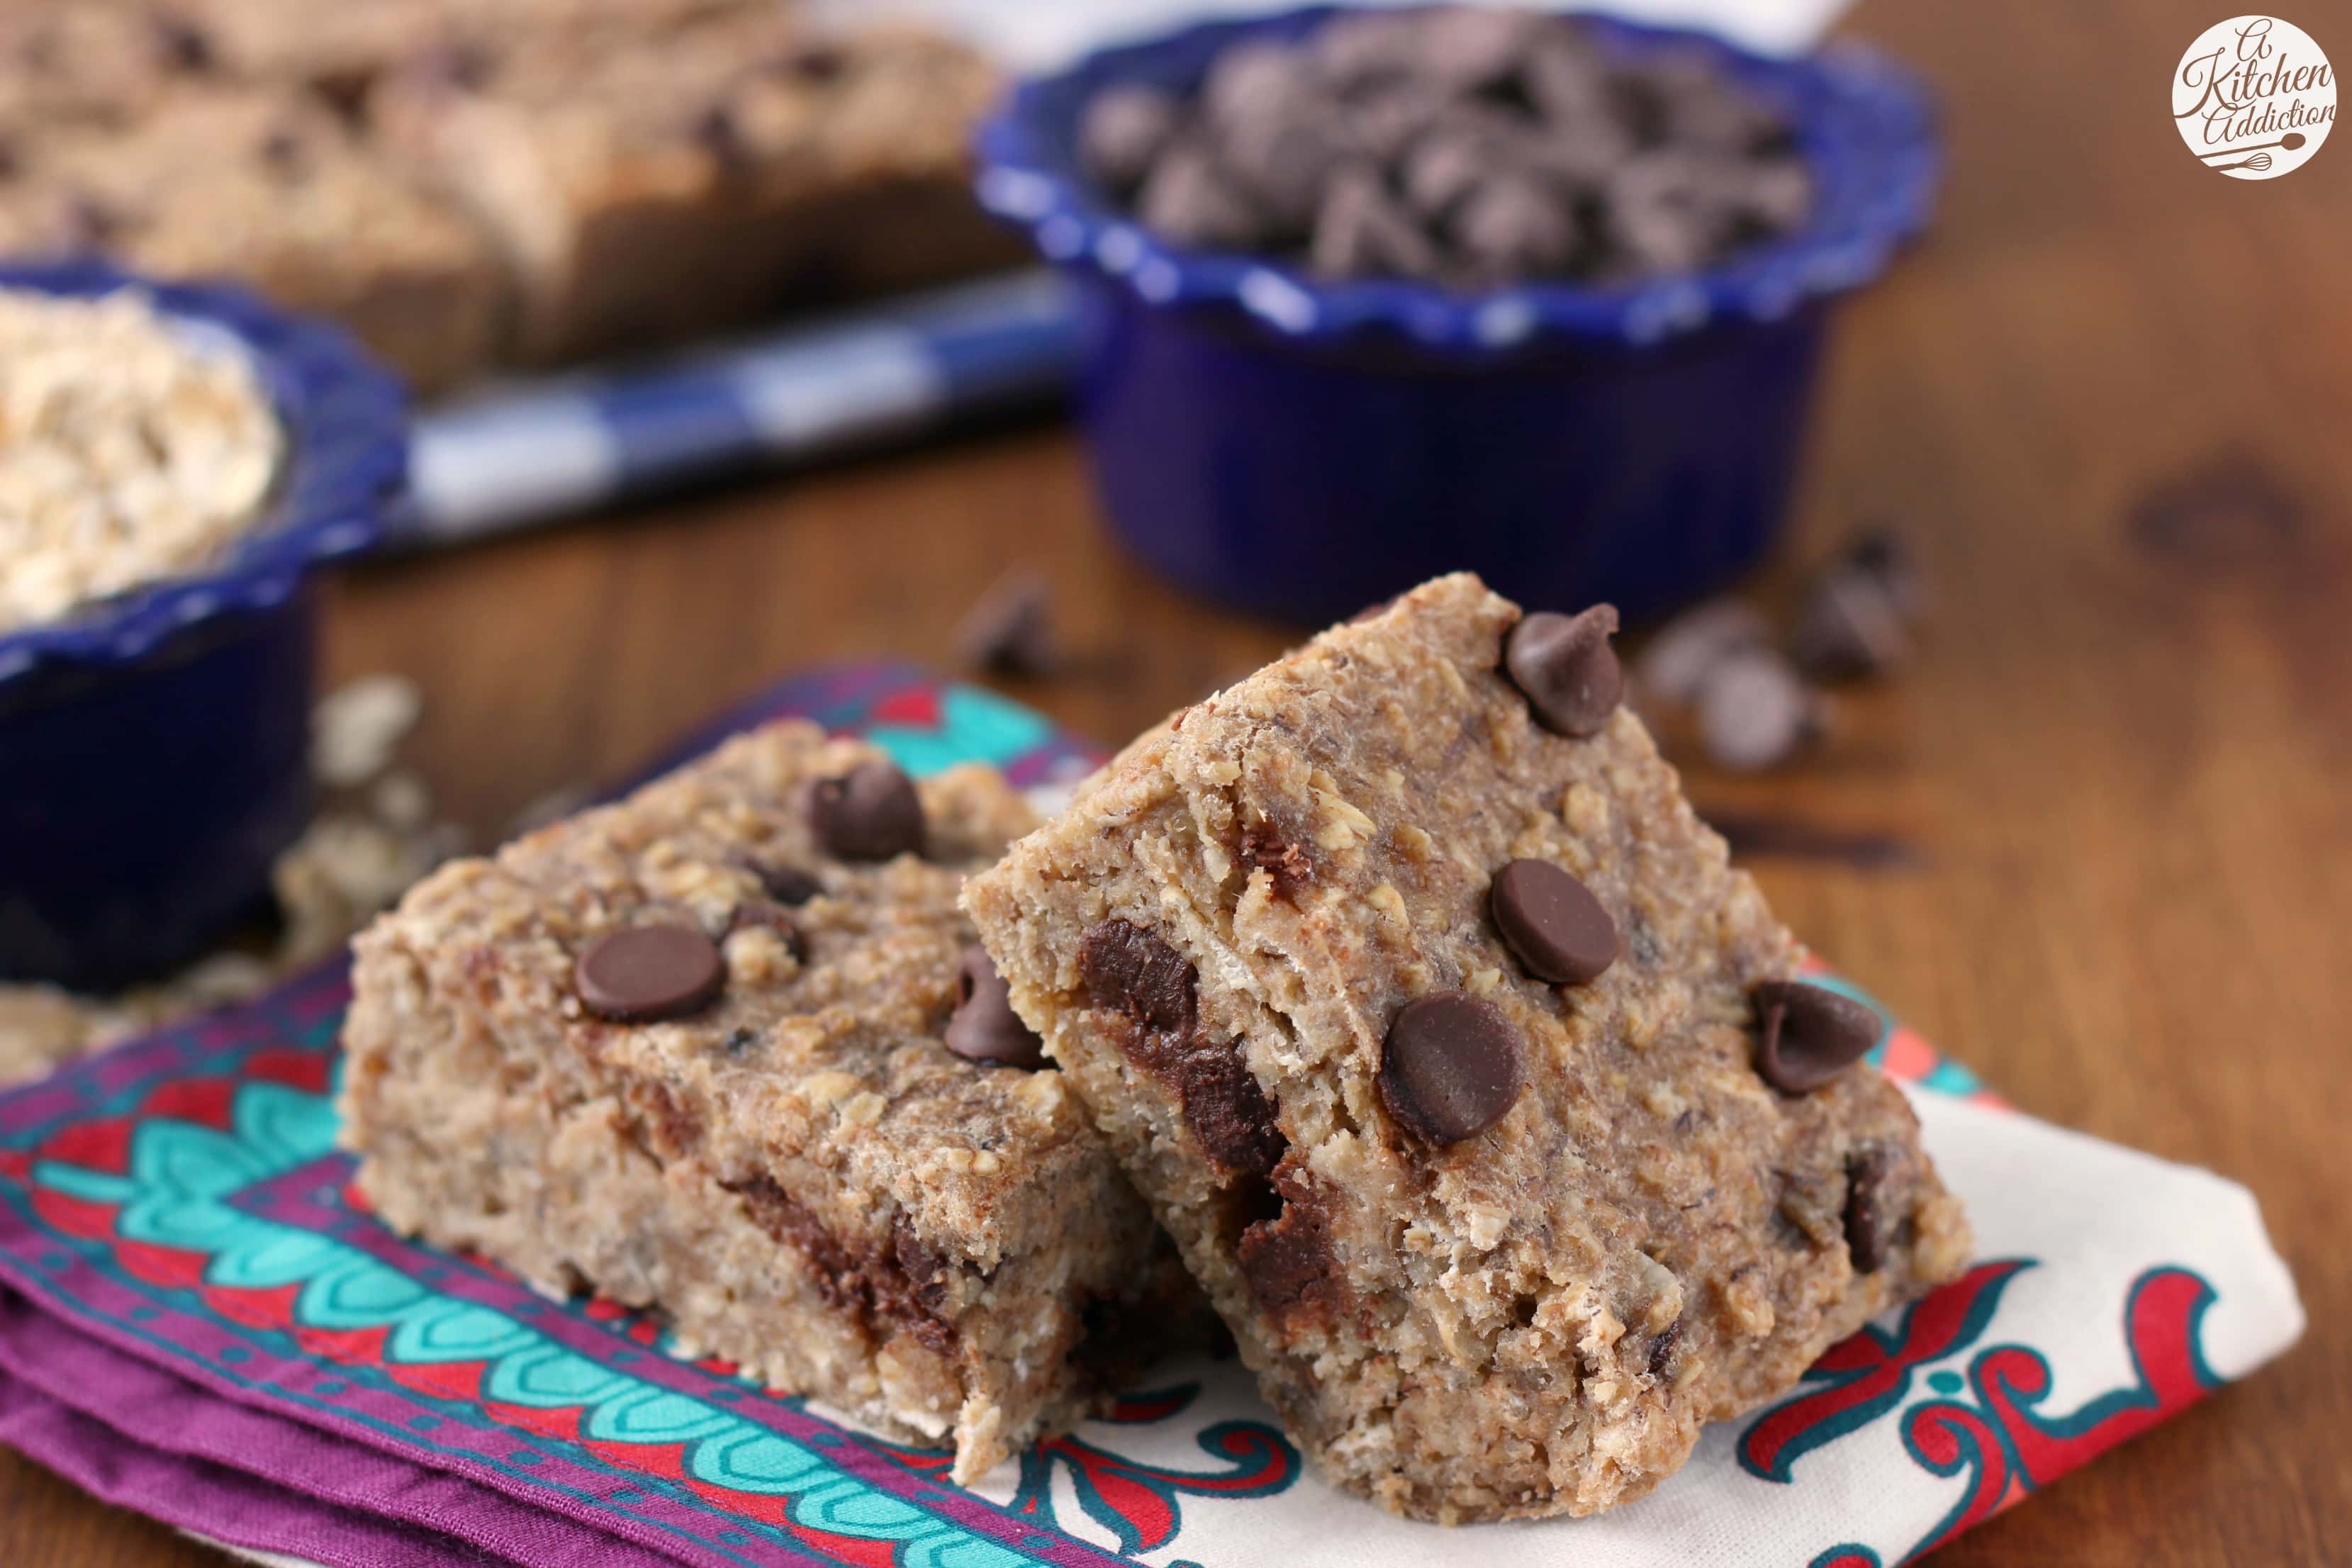 Lightened Up Chocolate Chip Banana Breakfast Bars Recipe from A Kitchen Addiction